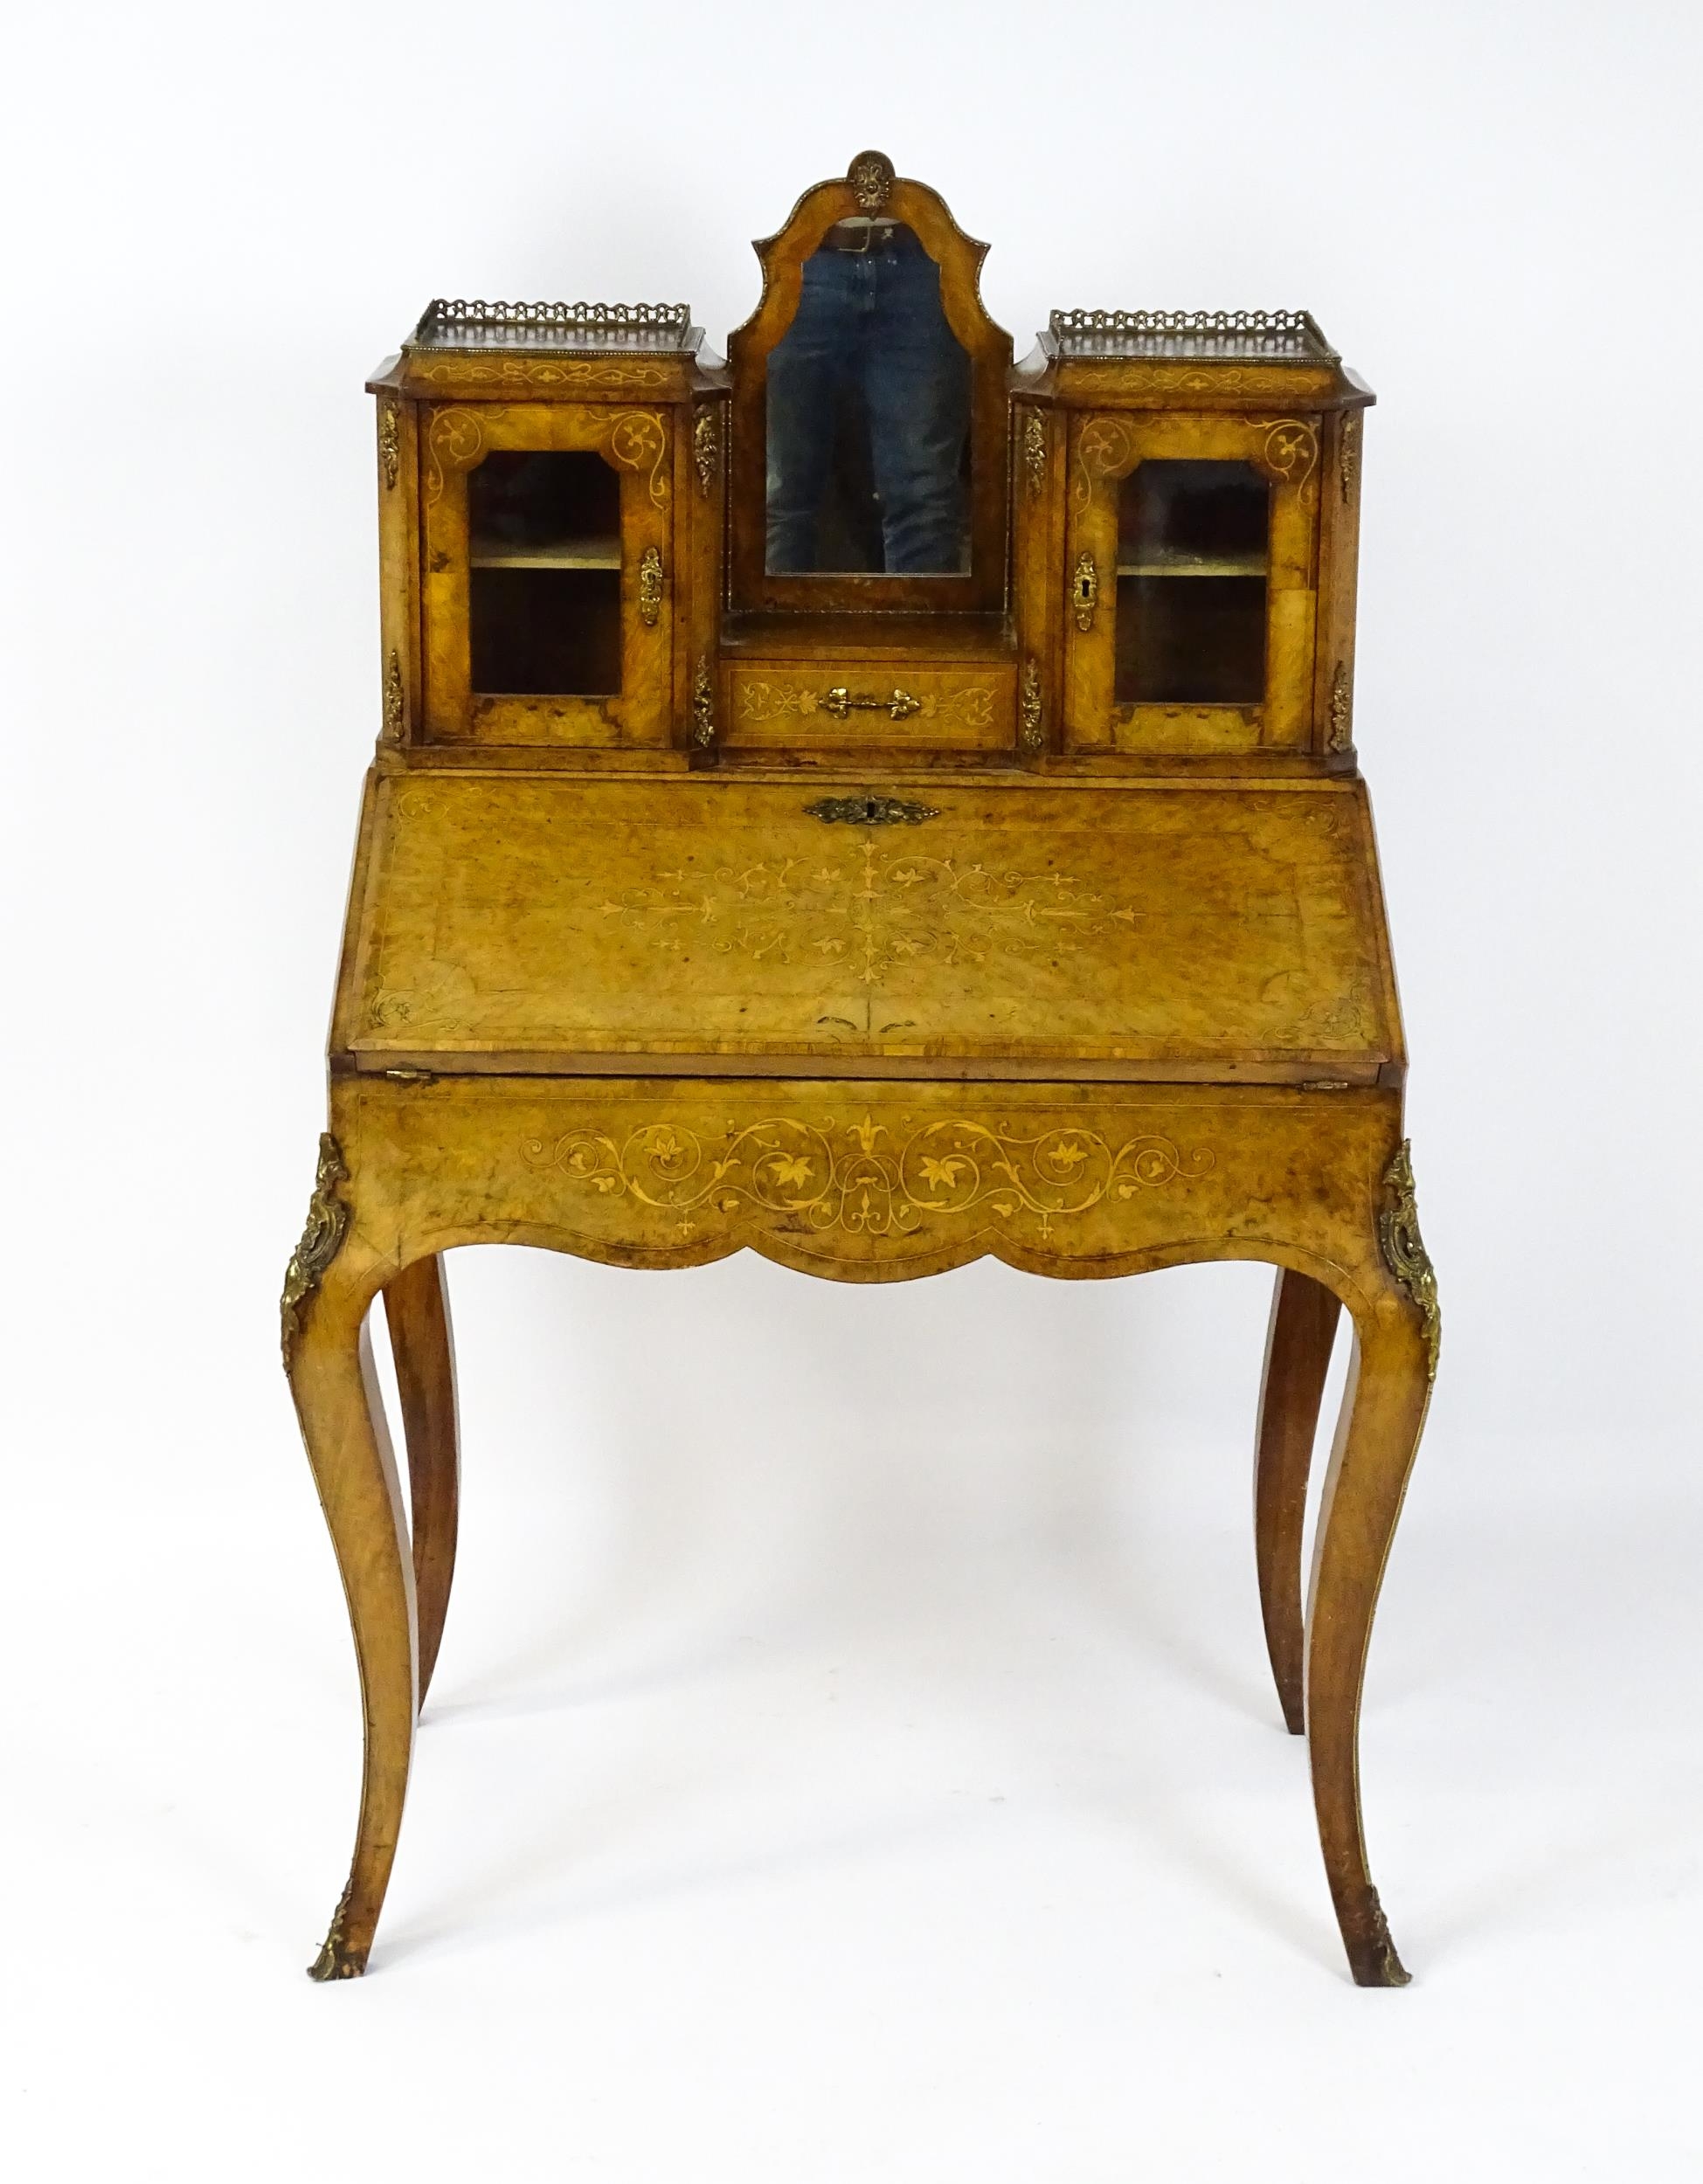 A 19thC burr walnut Bonheur du jour with a mirrored back stand and flanked by two glazed cabinets - Image 10 of 11